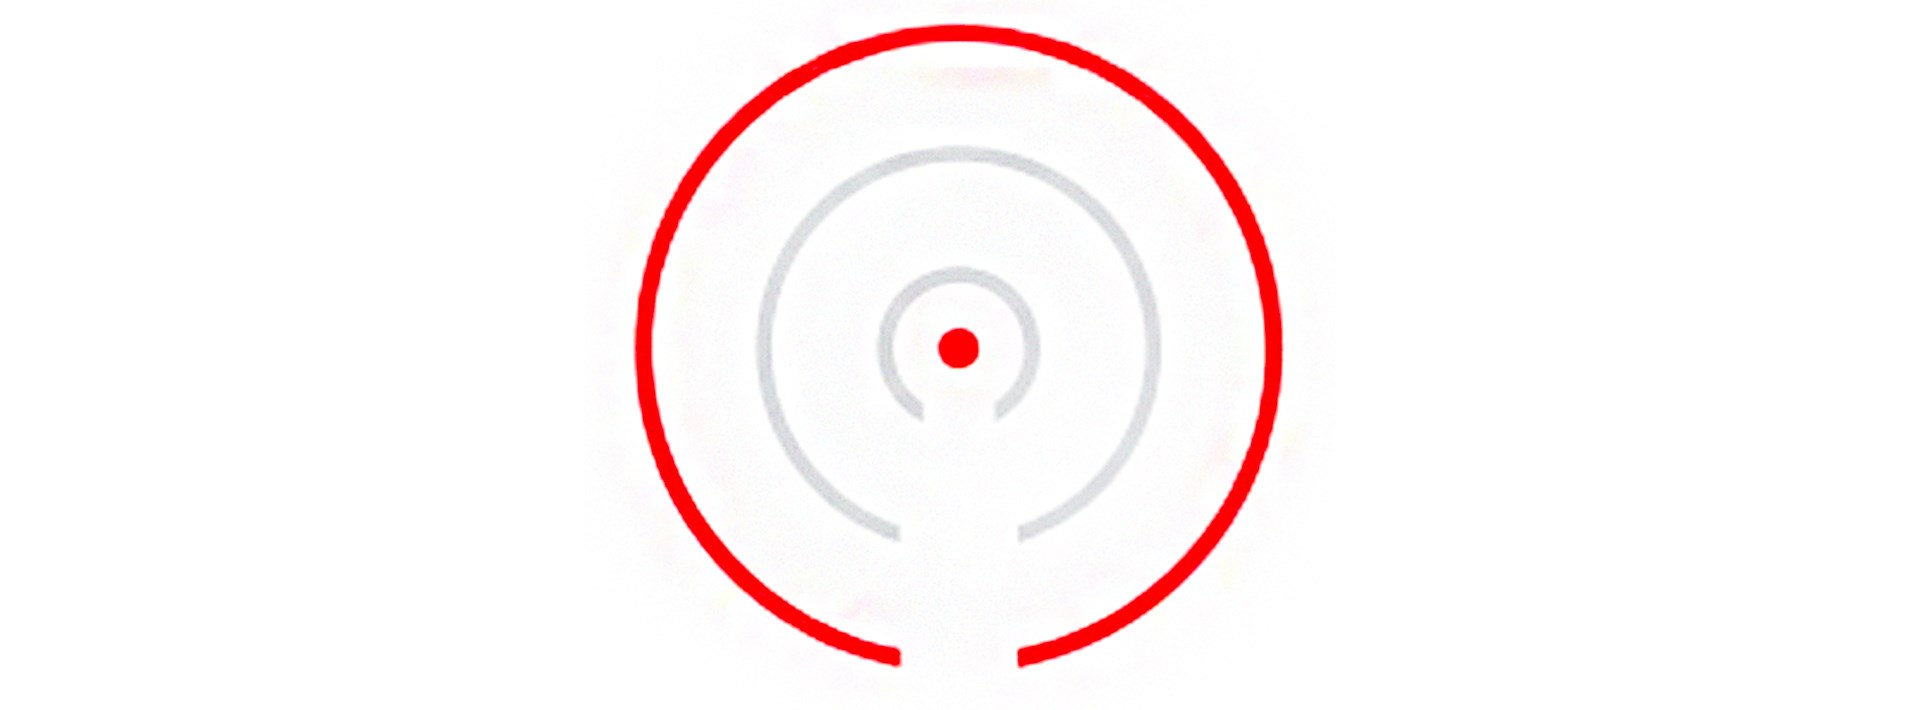 Holosun 507 Comp reticle circles red gray lines dot center white background